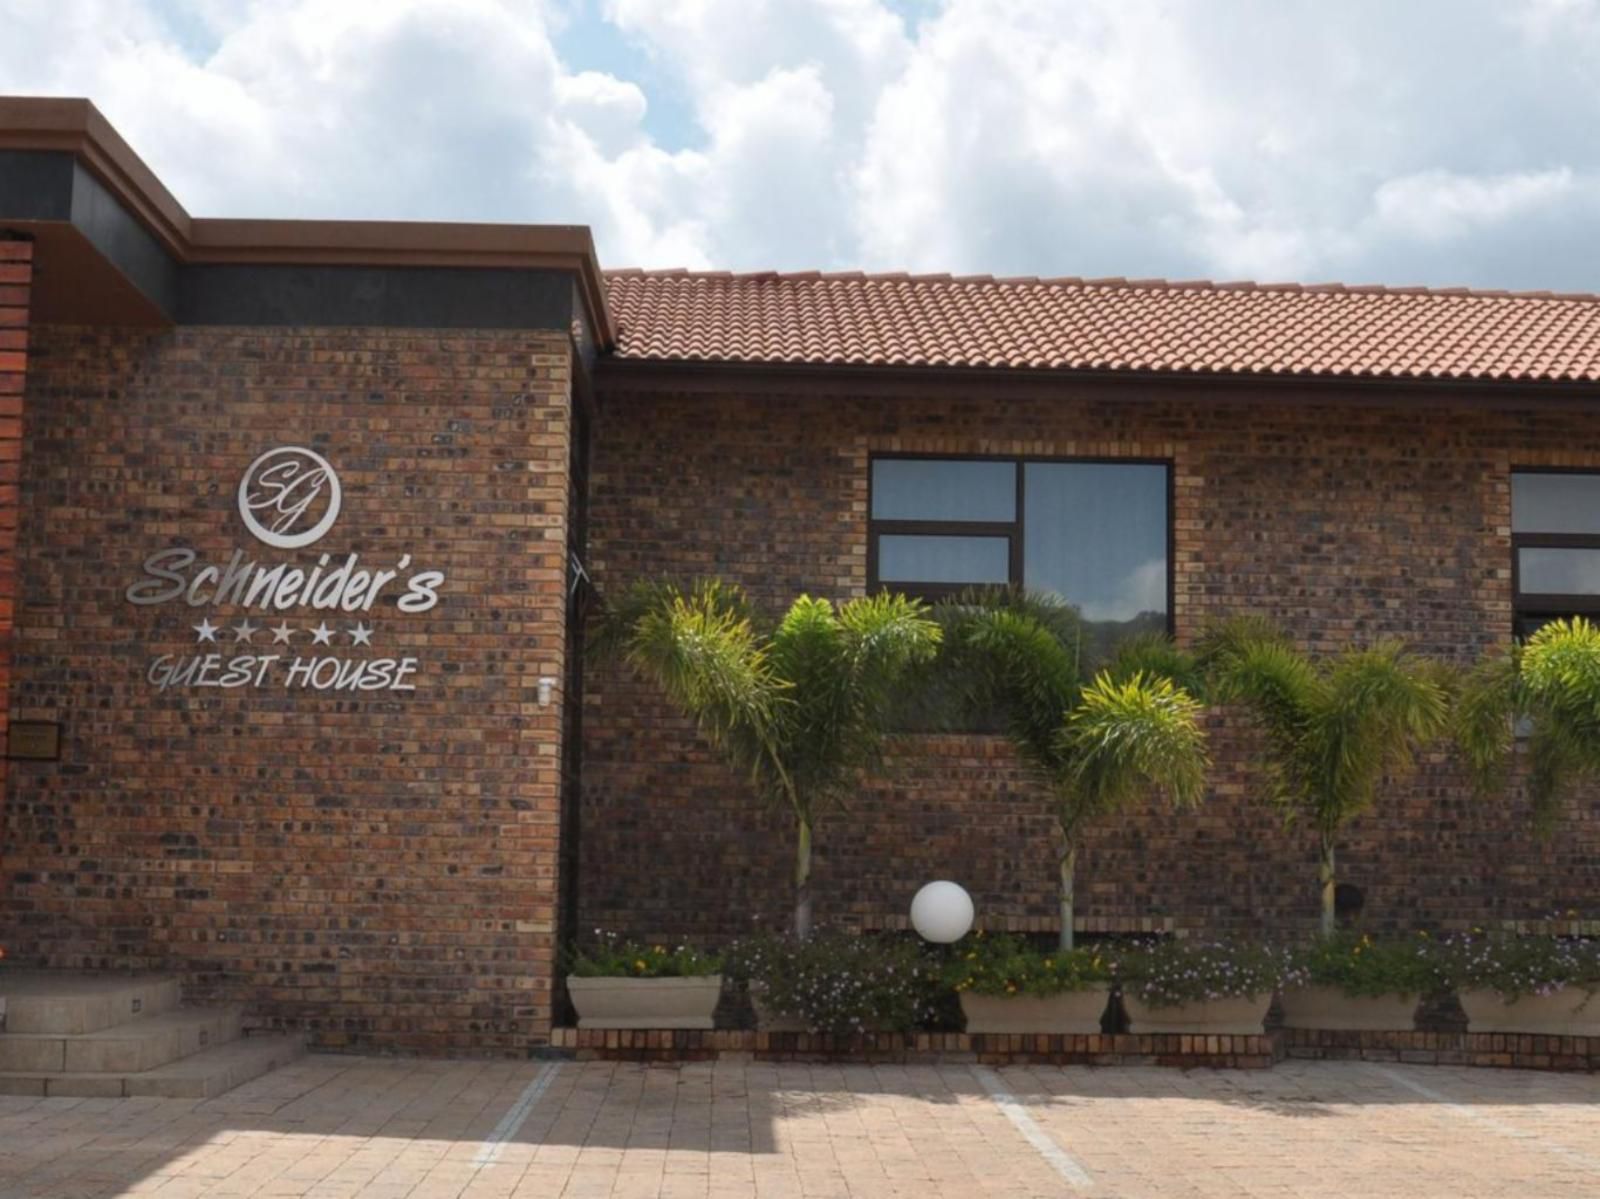 Schneider S Boutique Hotel Guesthouse White River Mpumalanga South Africa House, Building, Architecture